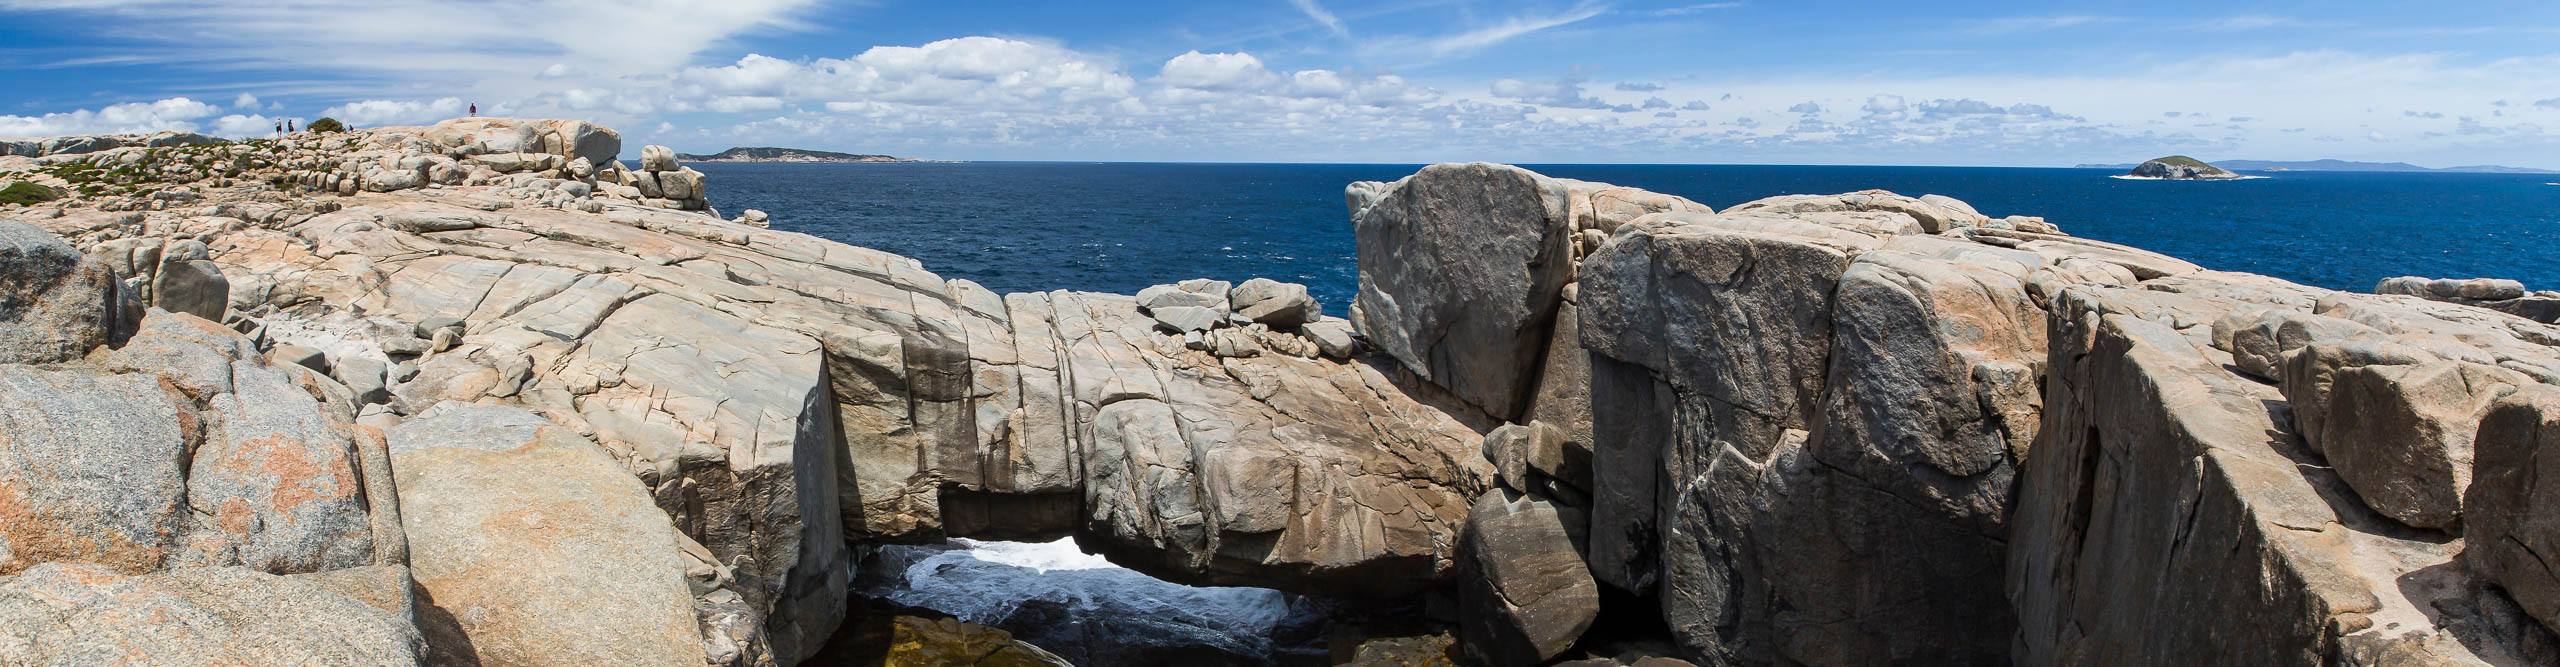 Natural Bridge rock formation near Albany in Western Australia, with the ocean in the background 